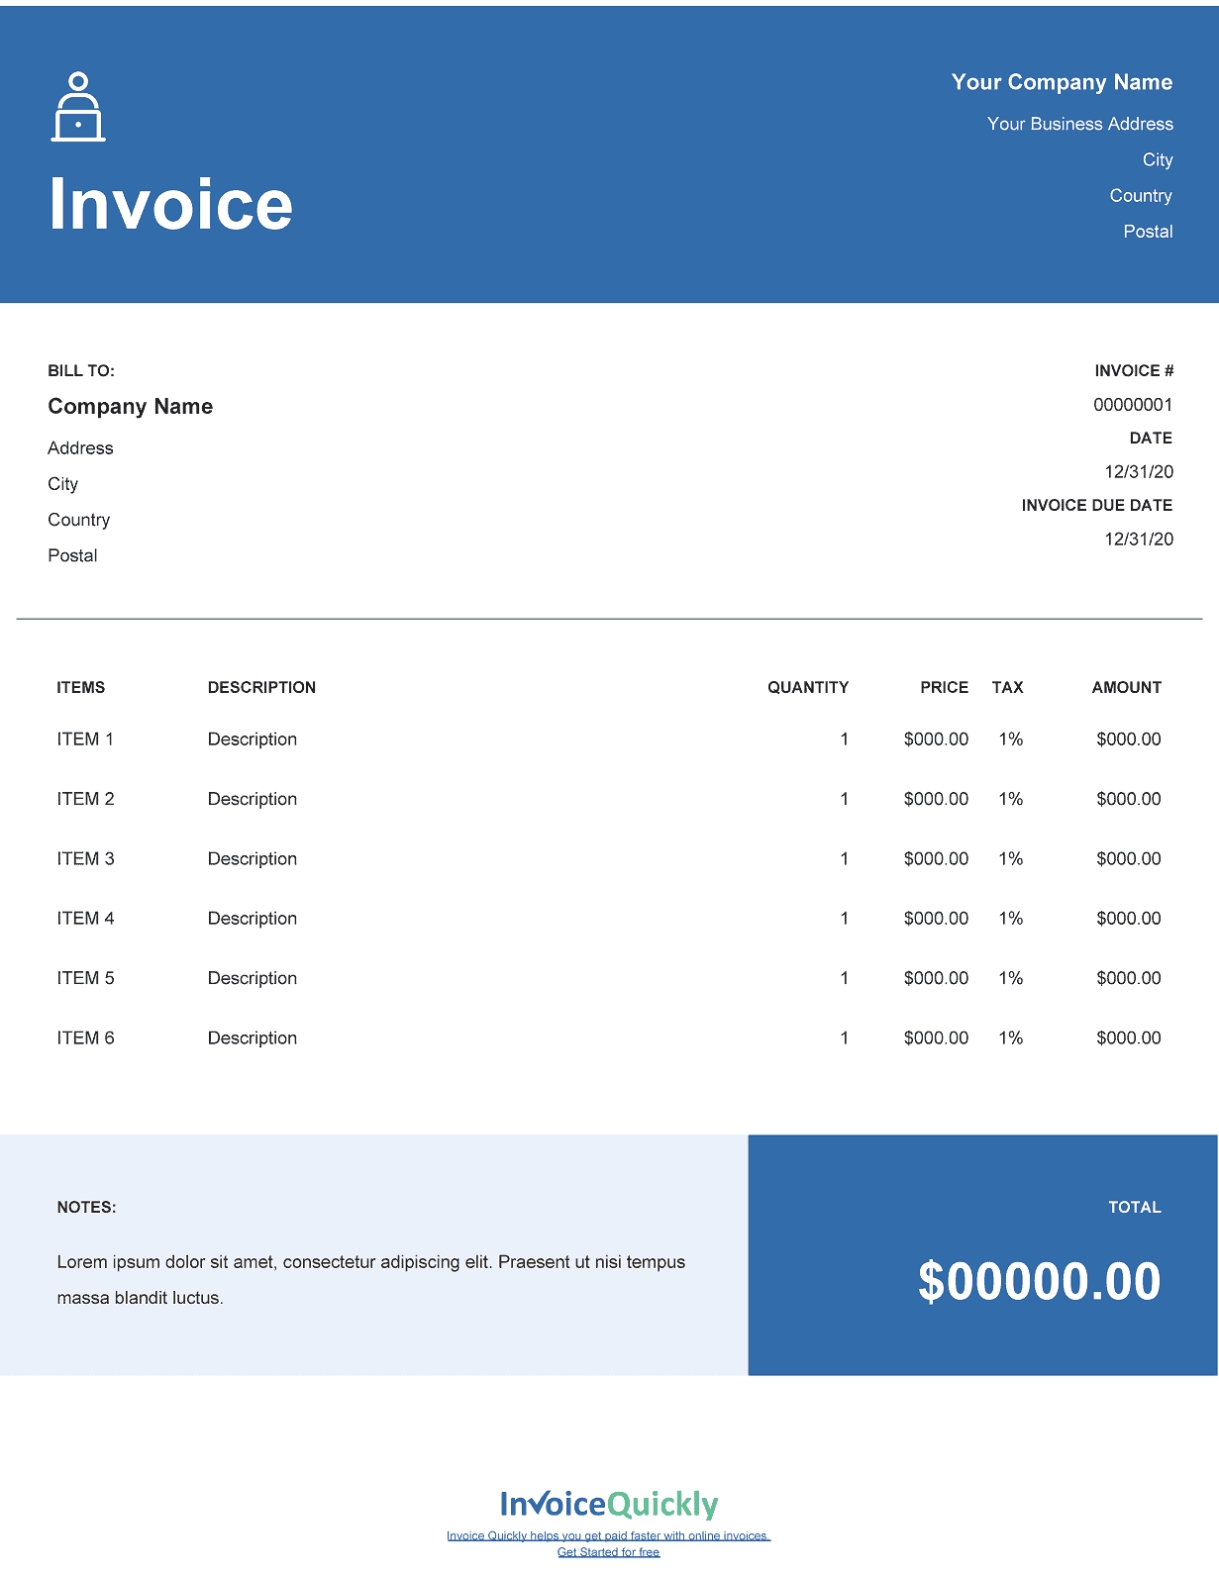 Invoice Template | Download, Customize, And Send Invoices In Minutes Intended For Google Doc Invoice Template